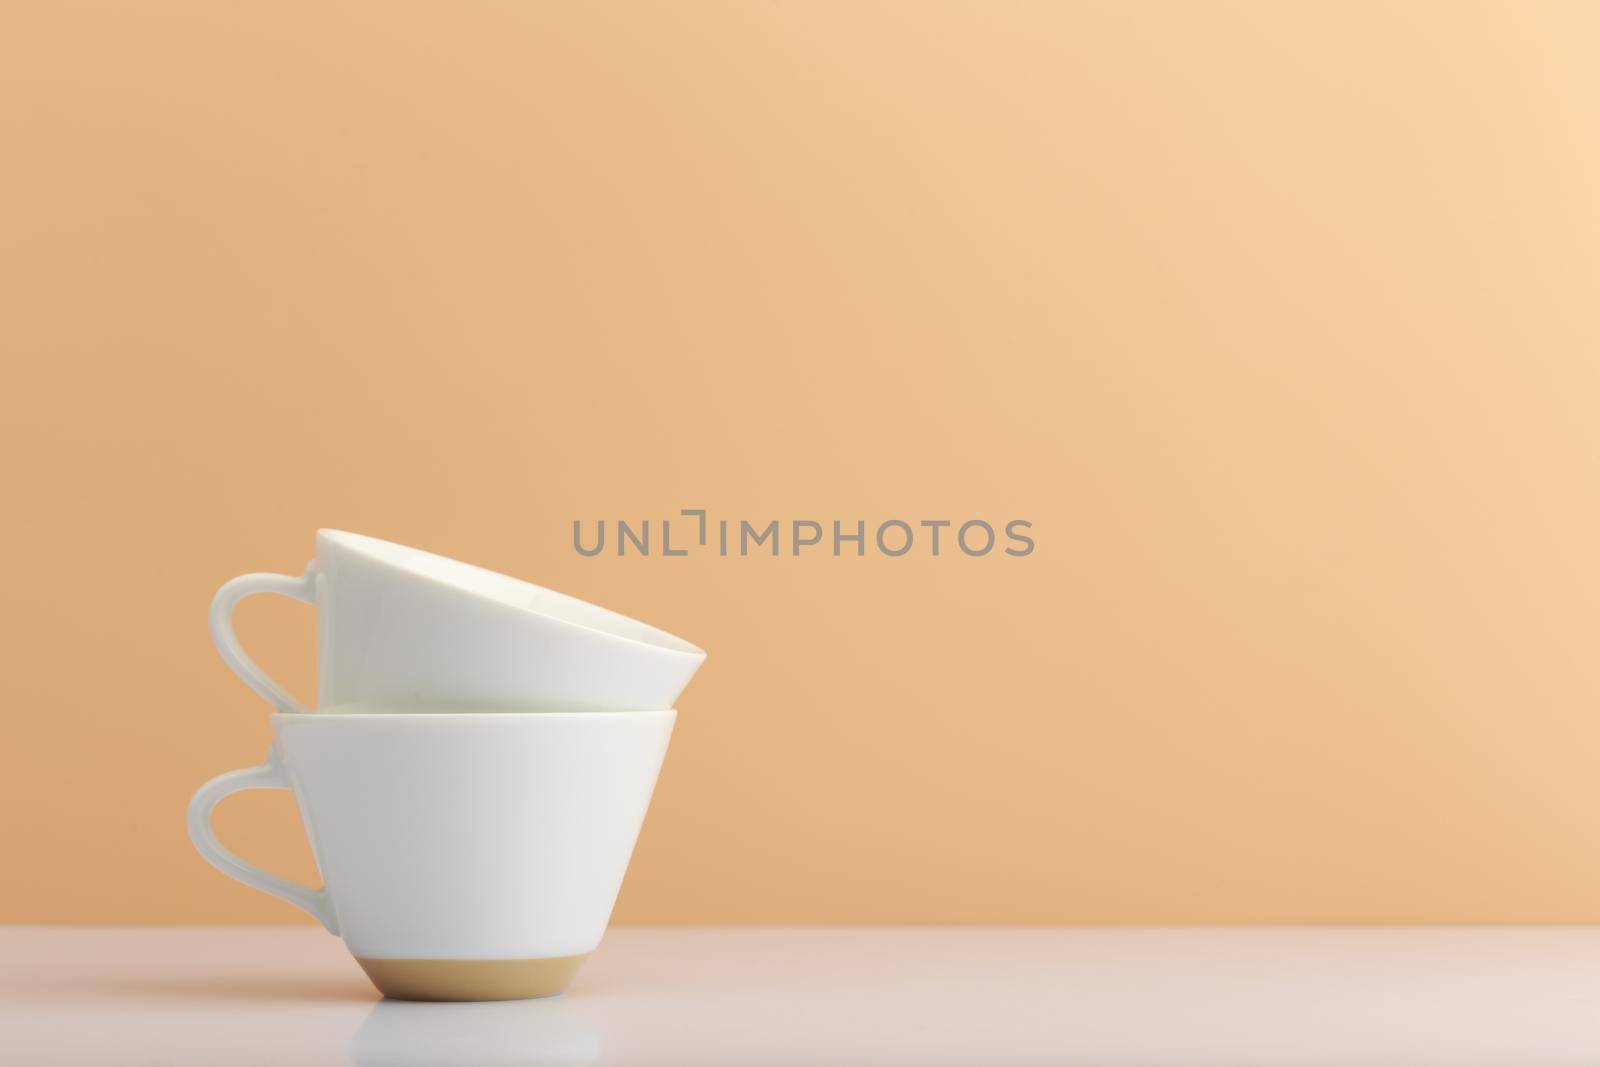 Two white ceramic cups one in another on white table against light beige background with copy space. Concept of hot drinks, tea and coffee